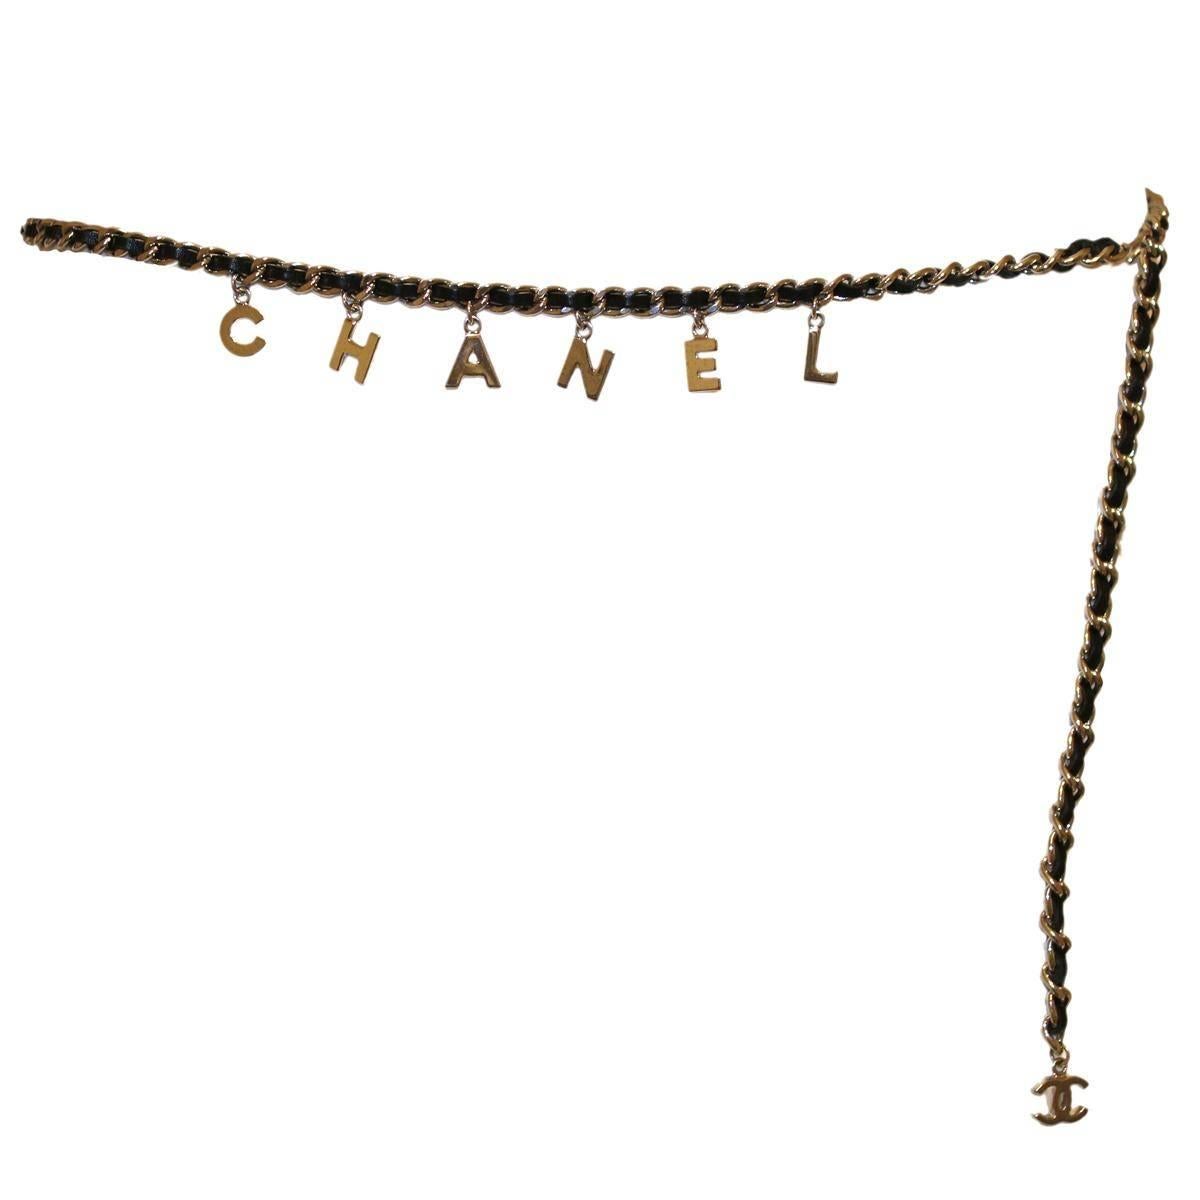 Beautiful and iconic Chanel belt
2007 Year
Metal chain
Black leather
Metal 